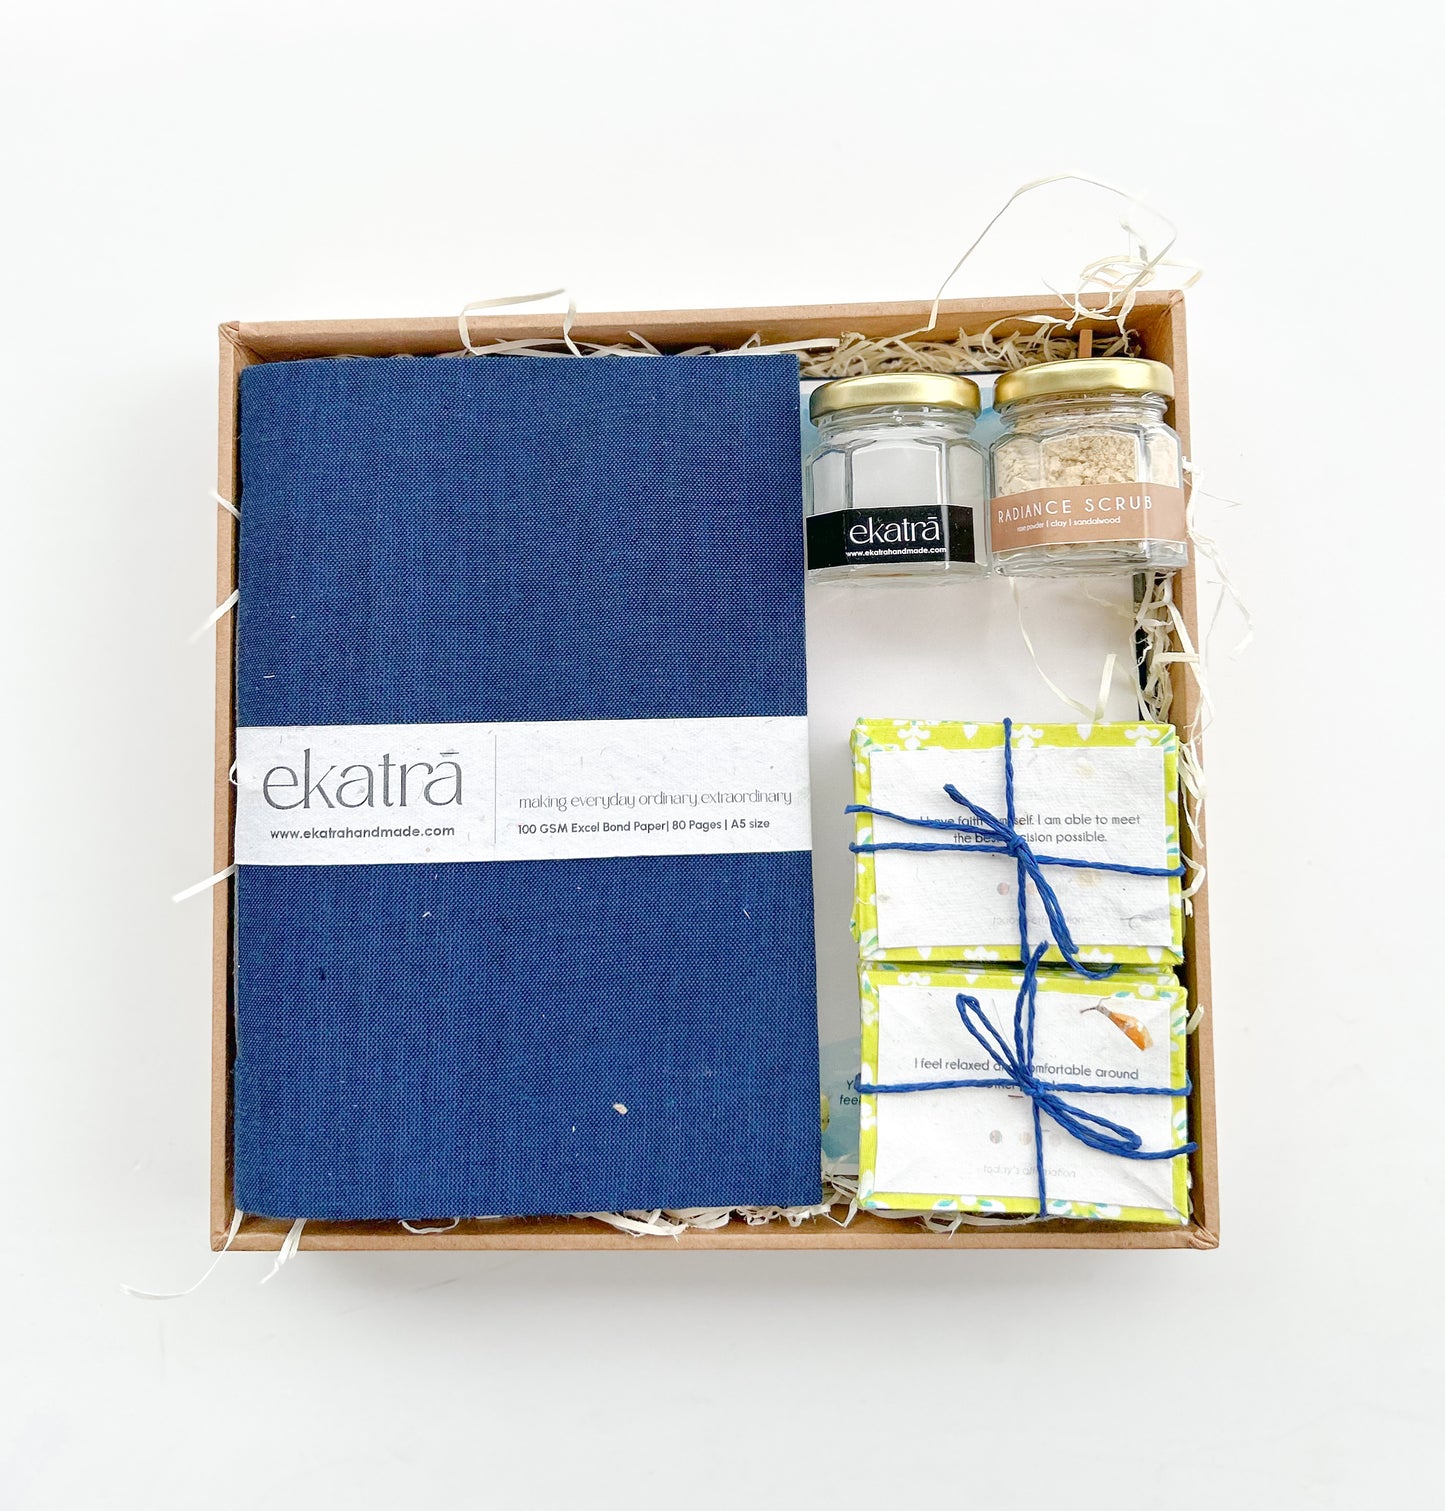 Ekatra Self care box : Elevate Your Well-Being with our Thoughtfully Curated Collection | Sustainable | Eco friendly | 10 Products